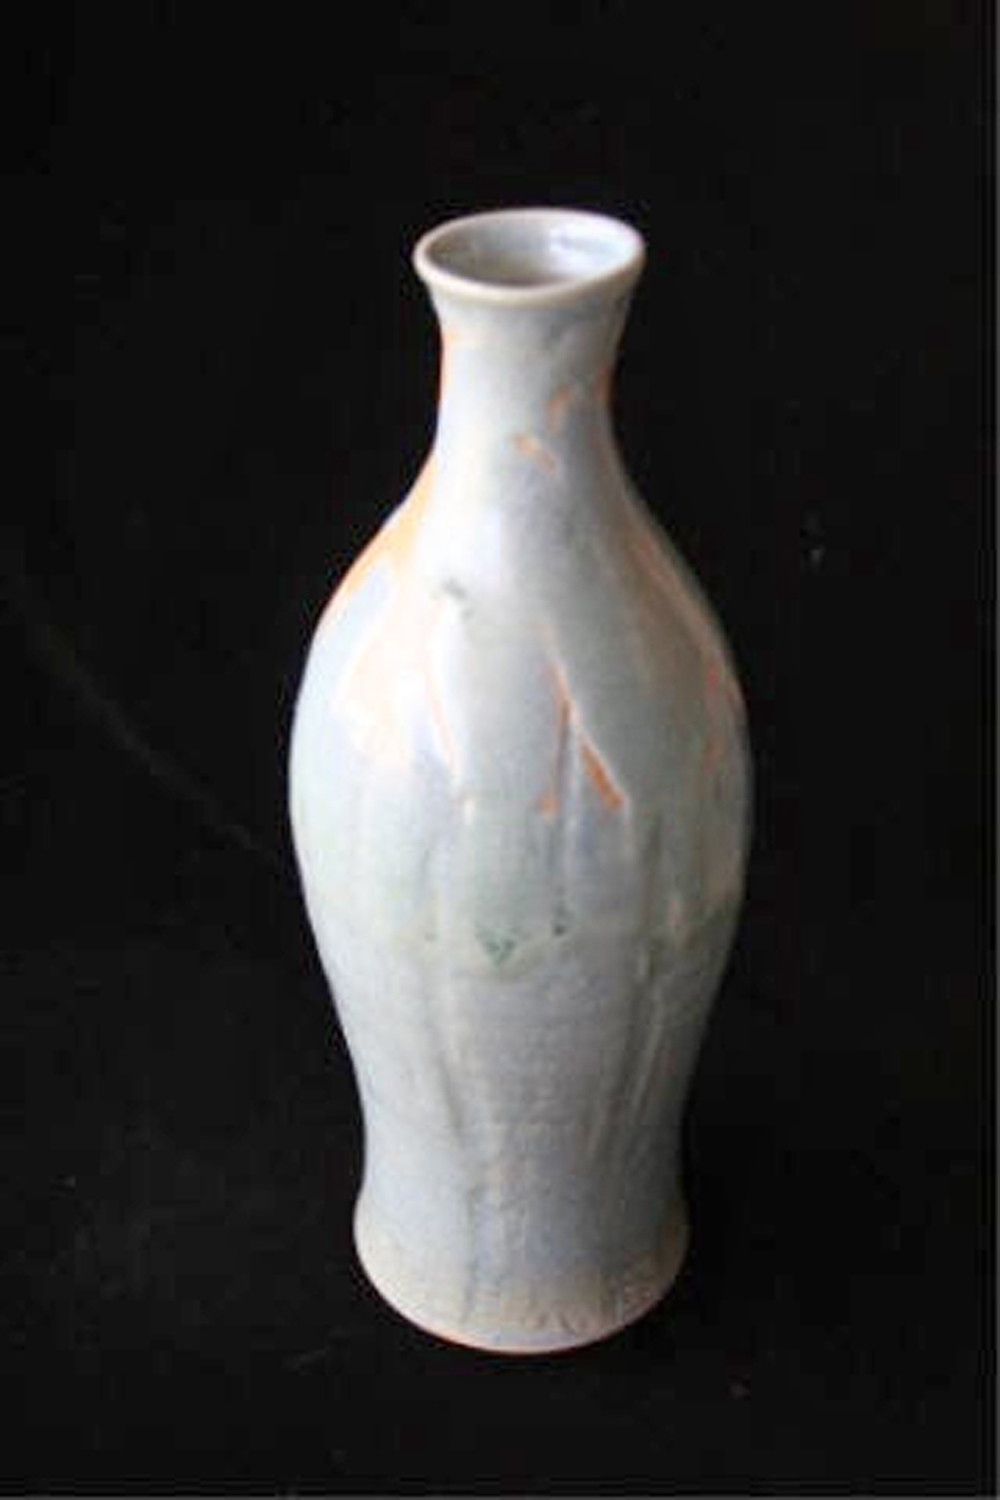 Lladro Bird Scene Vase Of Made Of Clay Trinh Mai Regarding Allens Green 2003 Wheel Thrown Carved Bentonite Clay Fired at Cone 10